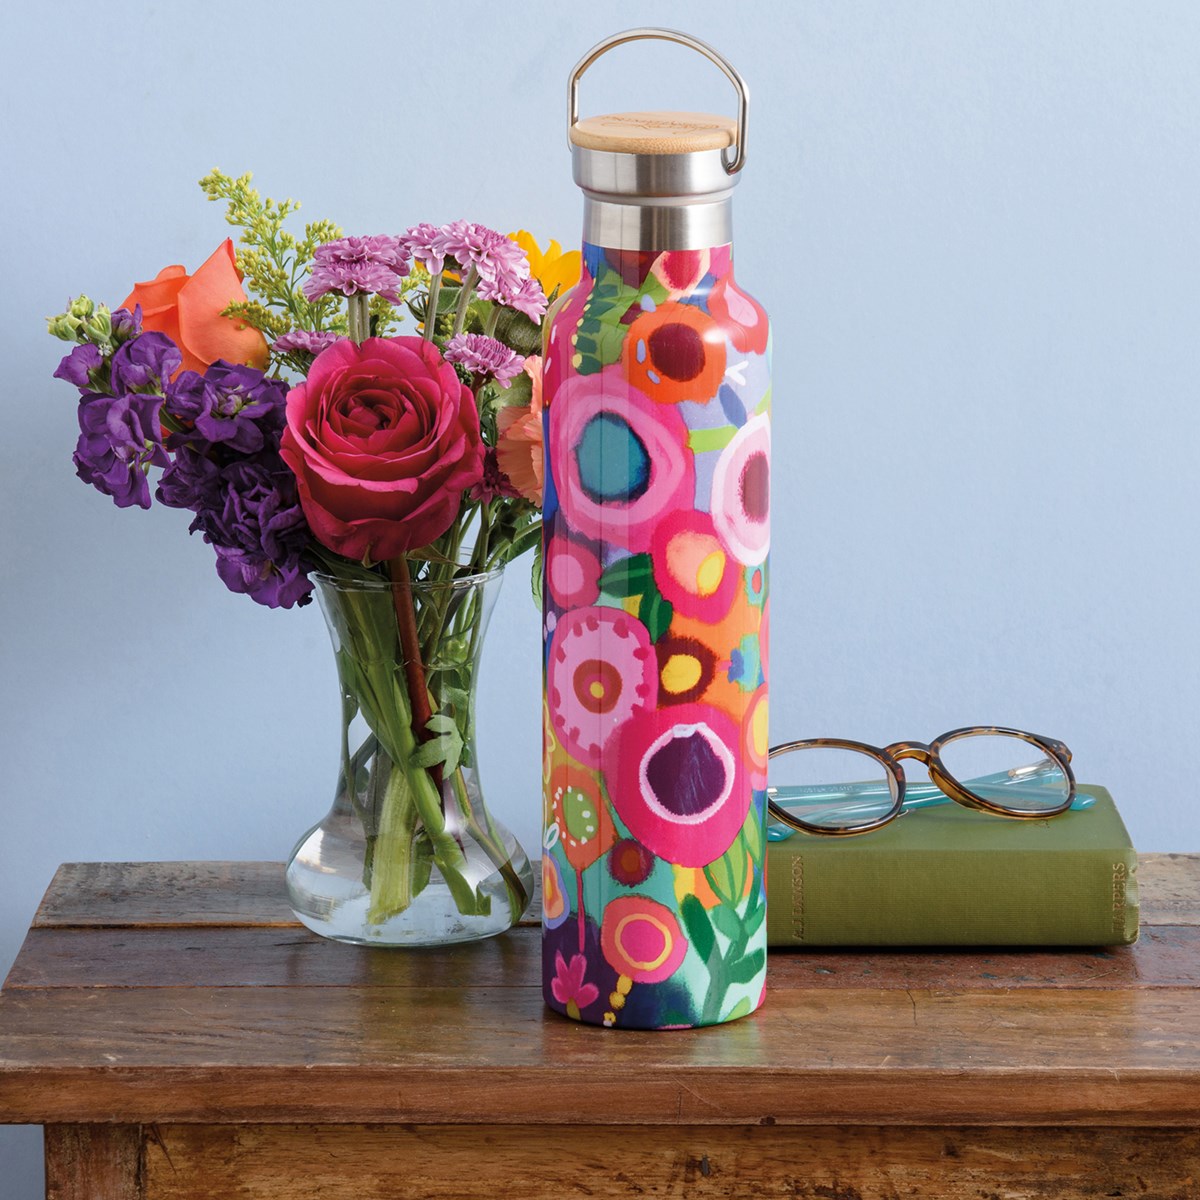 Pink Floral Insulated Bottle - Stainless Steel, Bamboo